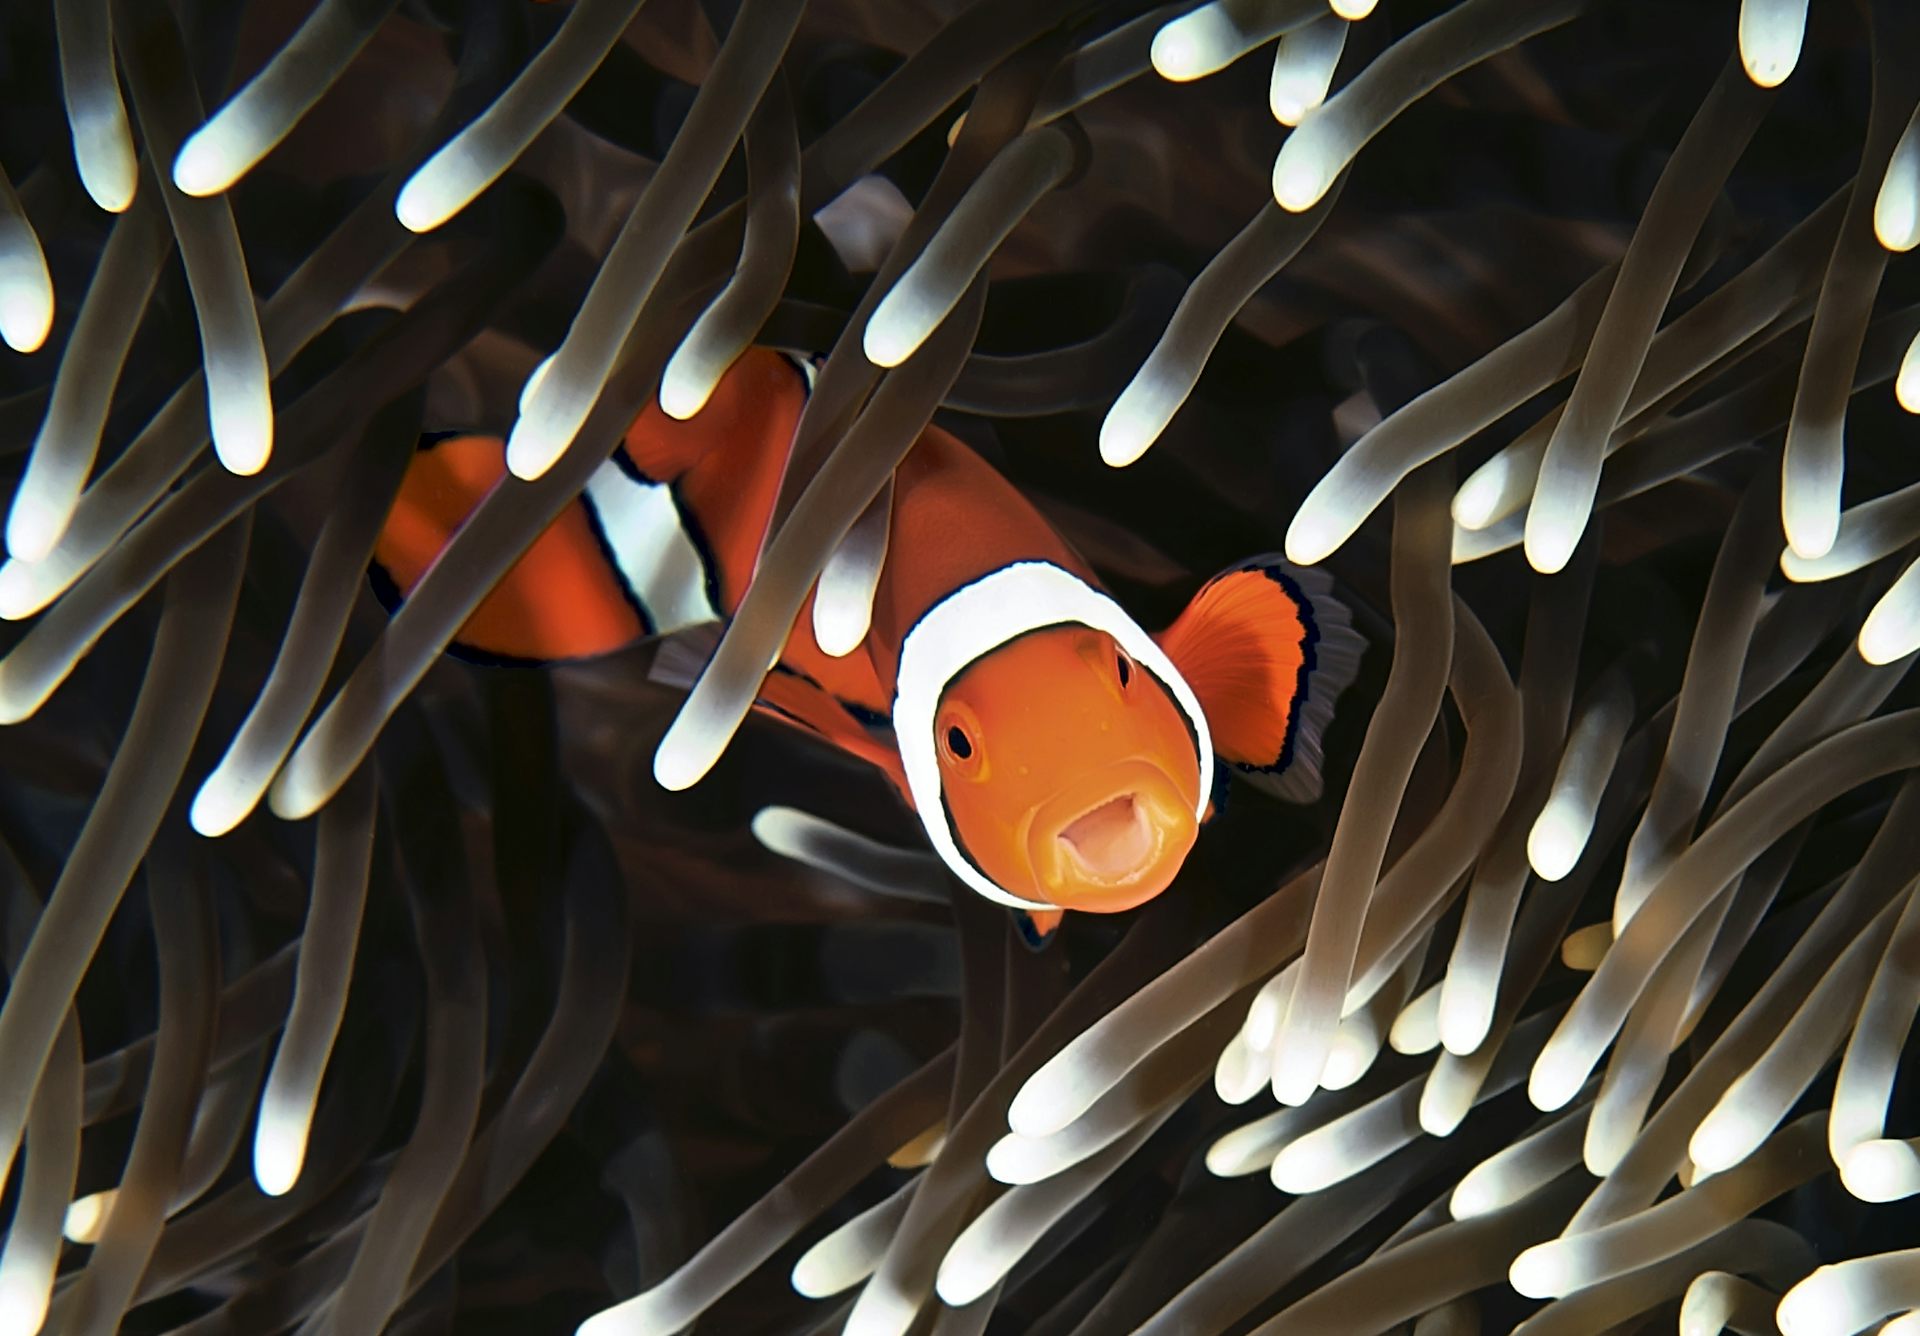 A clownfish hides among the tentacles of an anemone